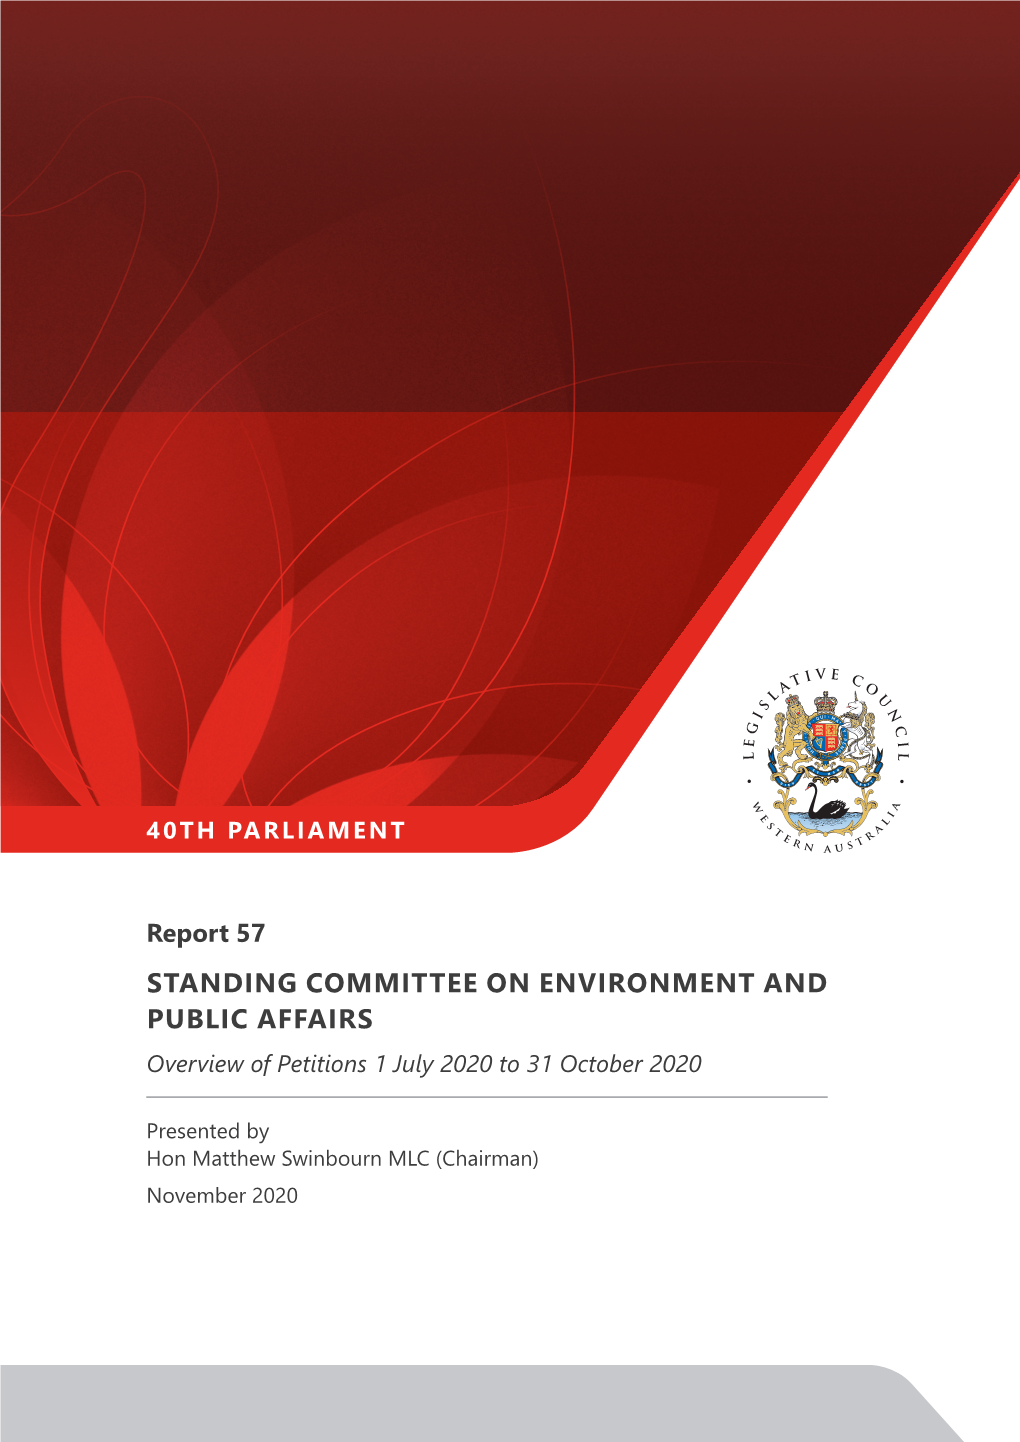 STANDING COMMITTEE on ENVIRONMENT and PUBLIC AFFAIRS Overview of Petitions 1 July 2020 to 31 October 2020